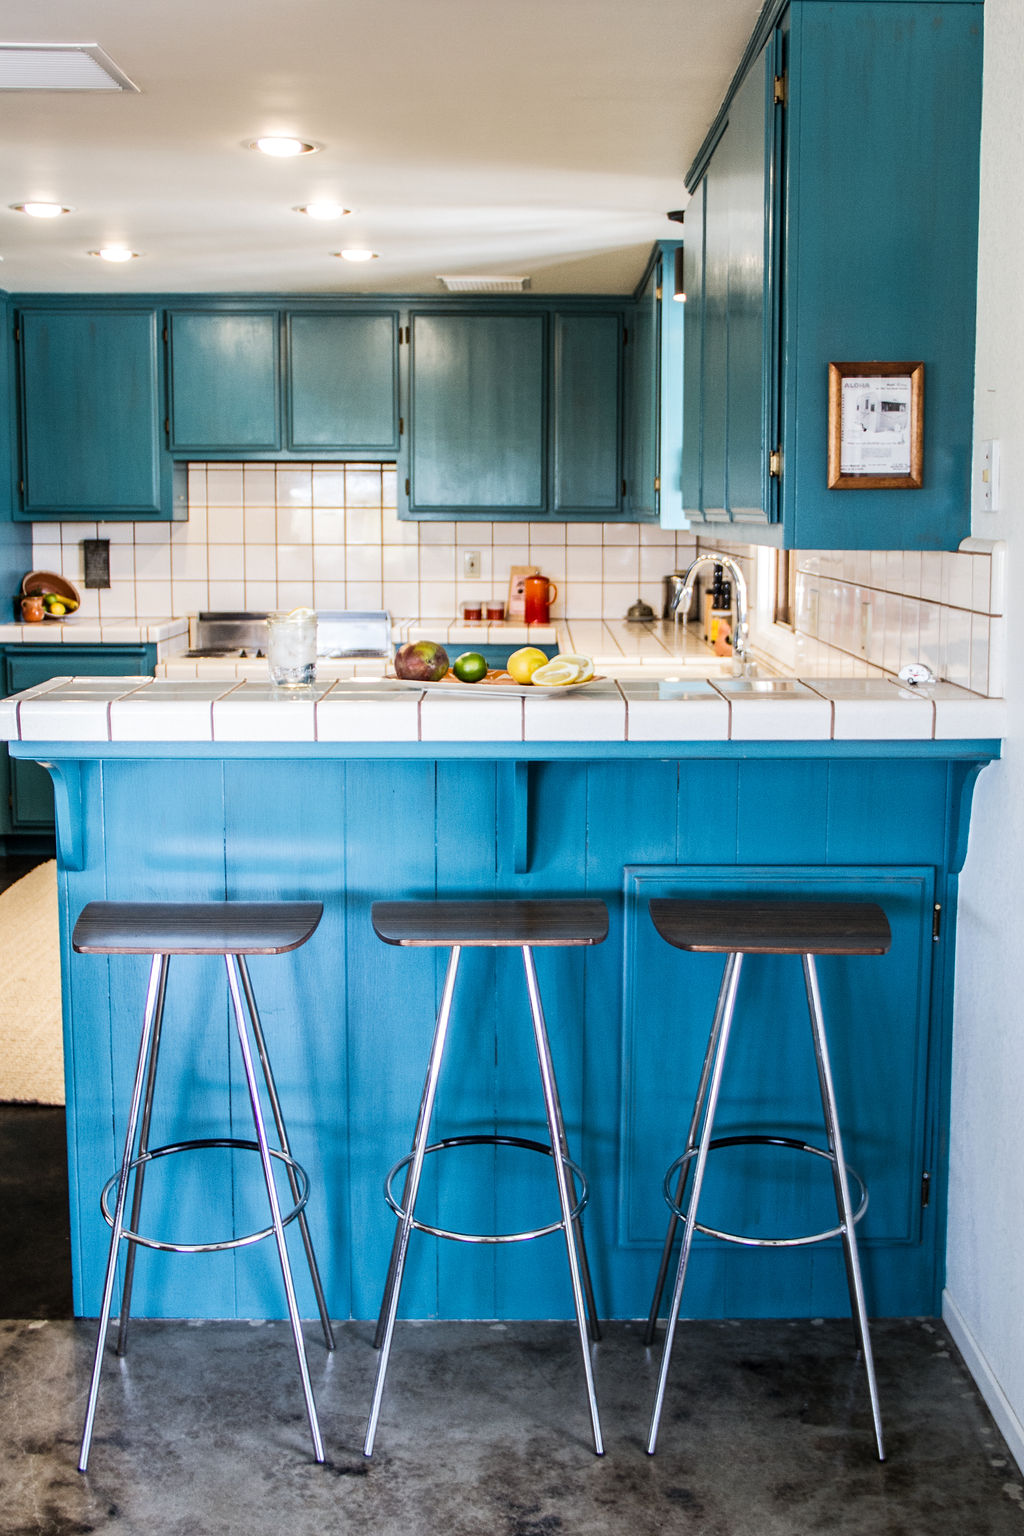 Kitchen with bar stools for high top counter